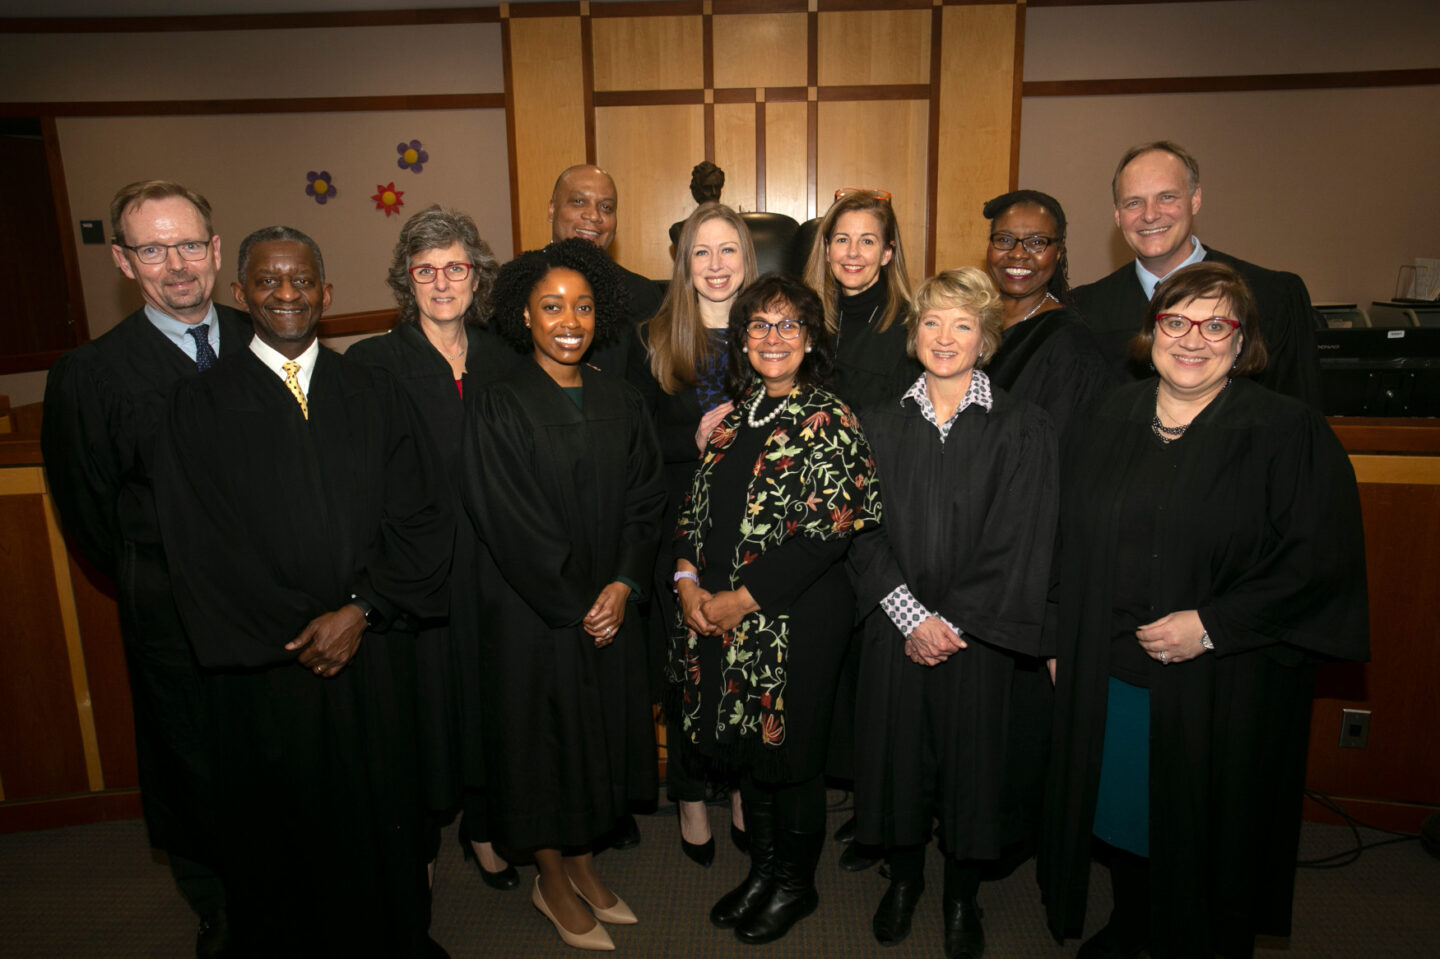 Chelsea Clinton with a group of judges. Most are wearing black robes.